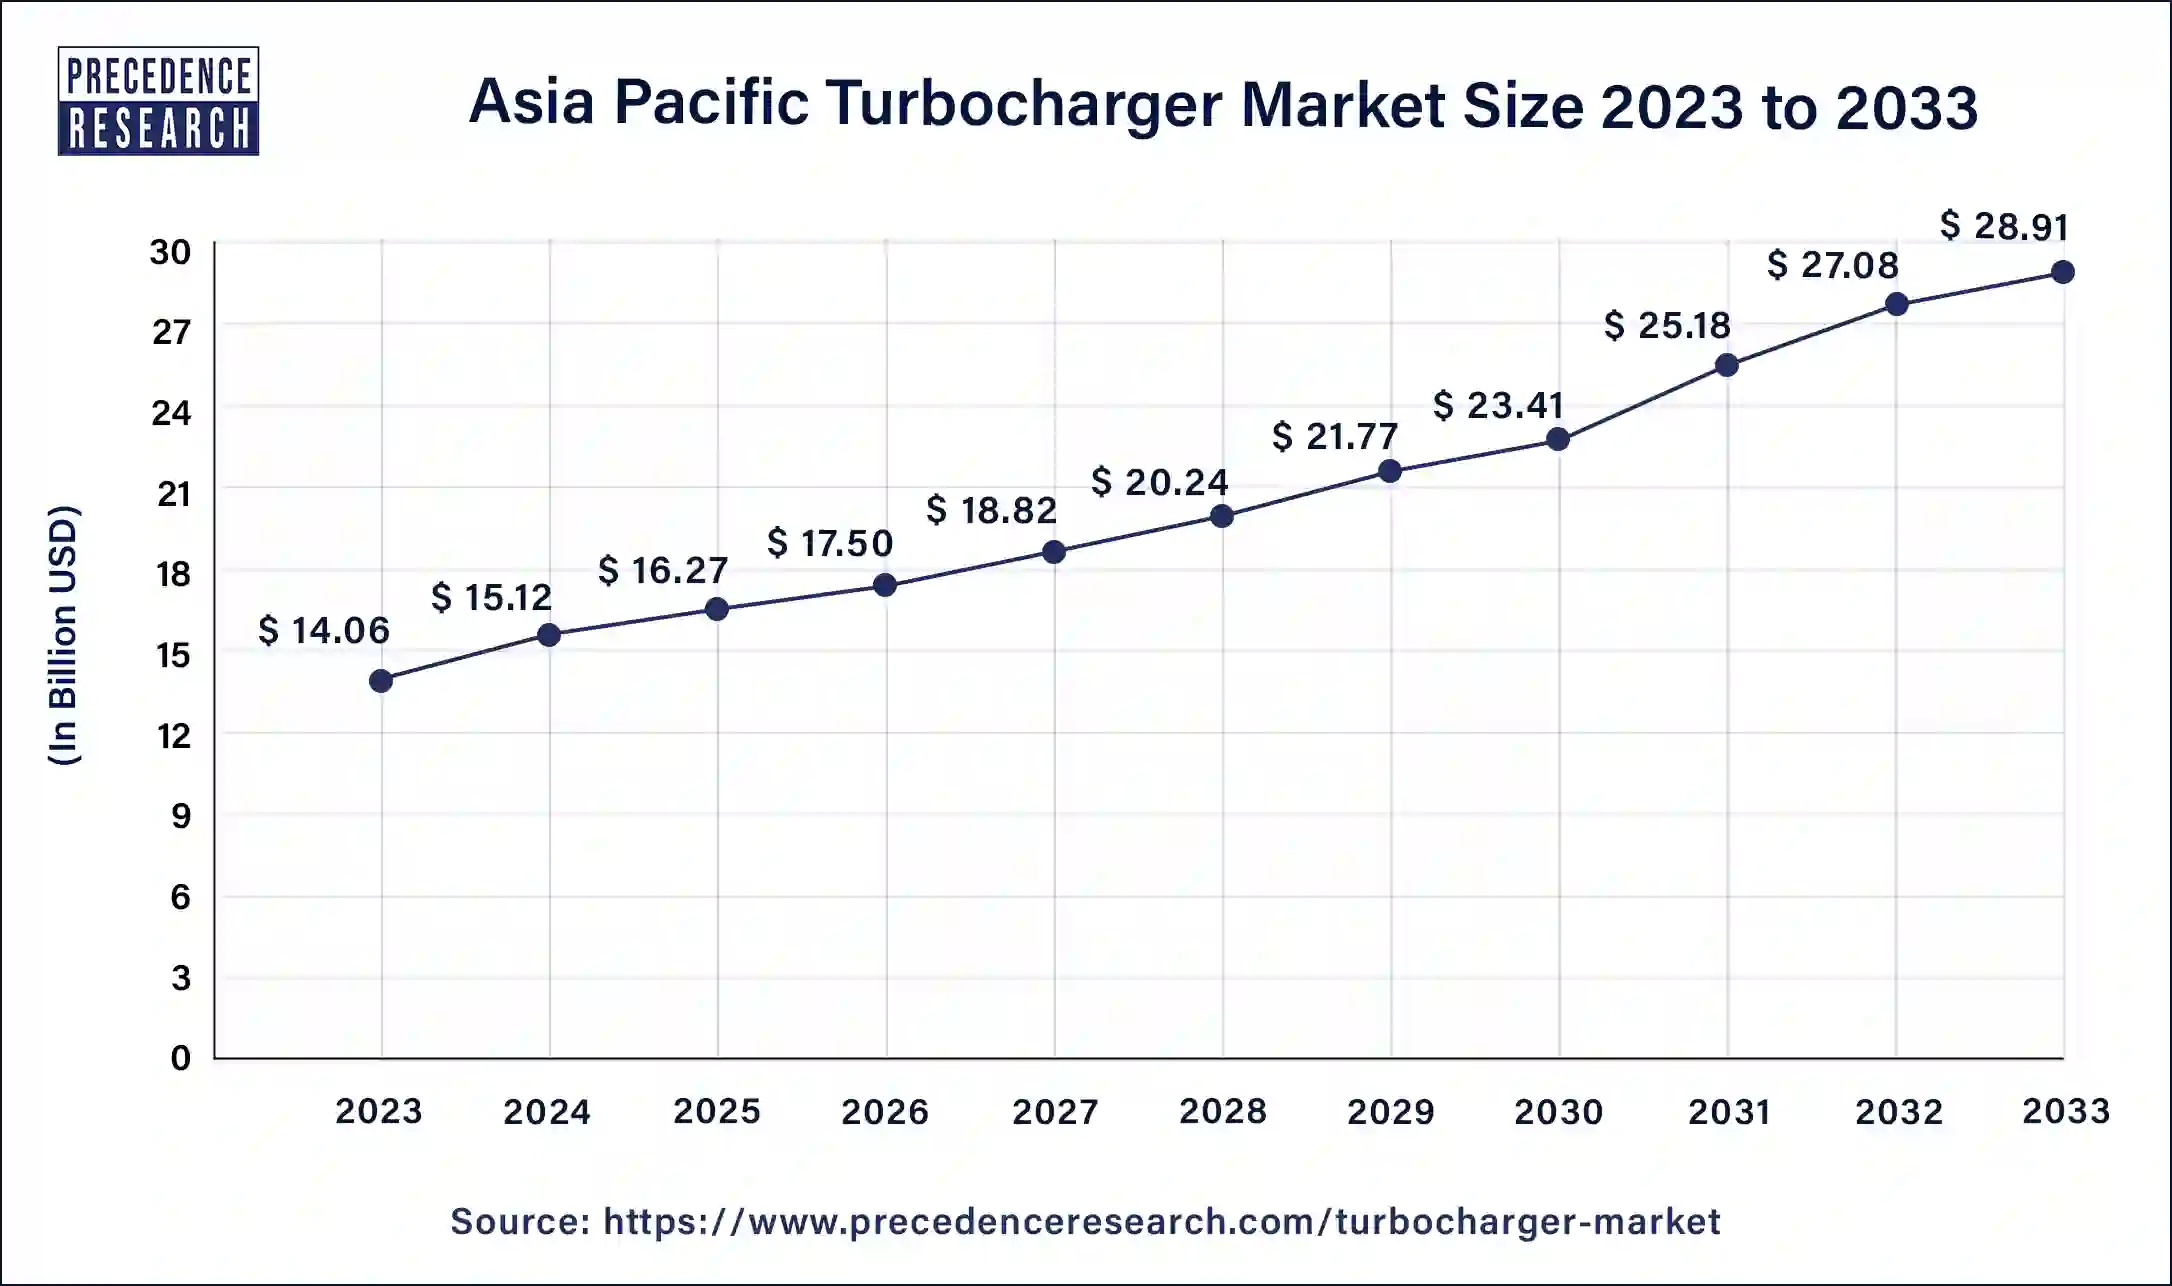 Asia Pacific Turbocharger Market Size 2024 to 2033